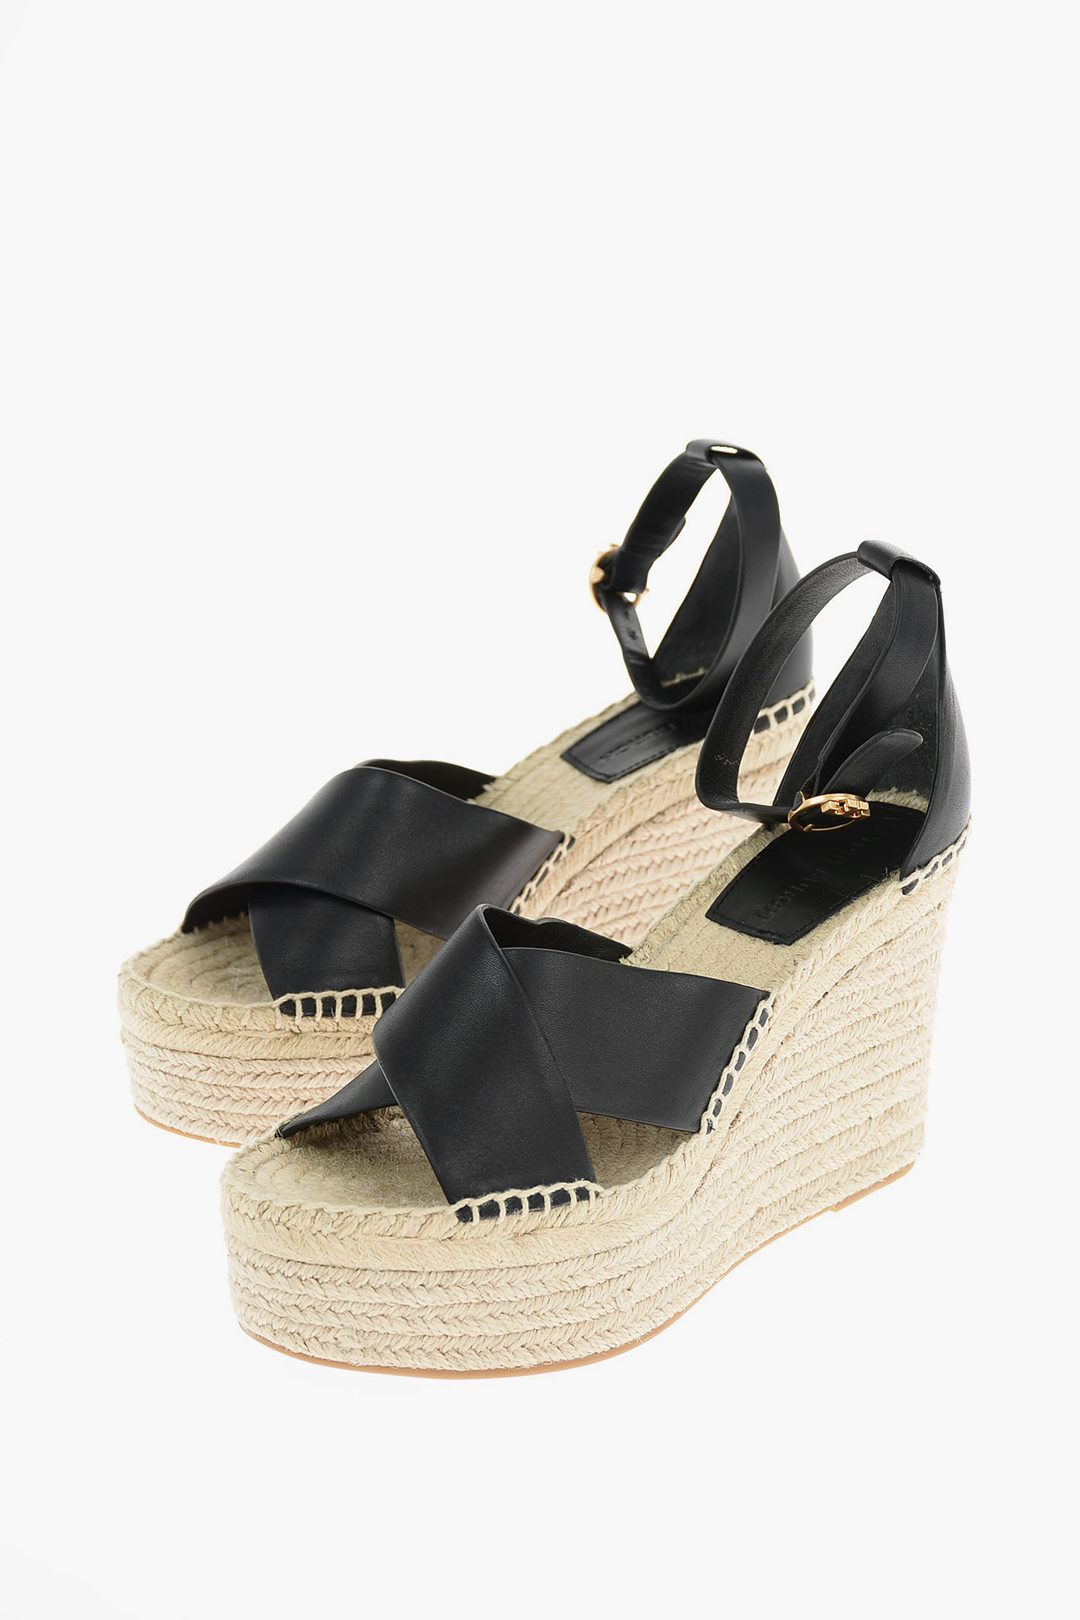 Tory Burch 9cm leather SELBY Wedge espadrilles women - Glamood Outlet